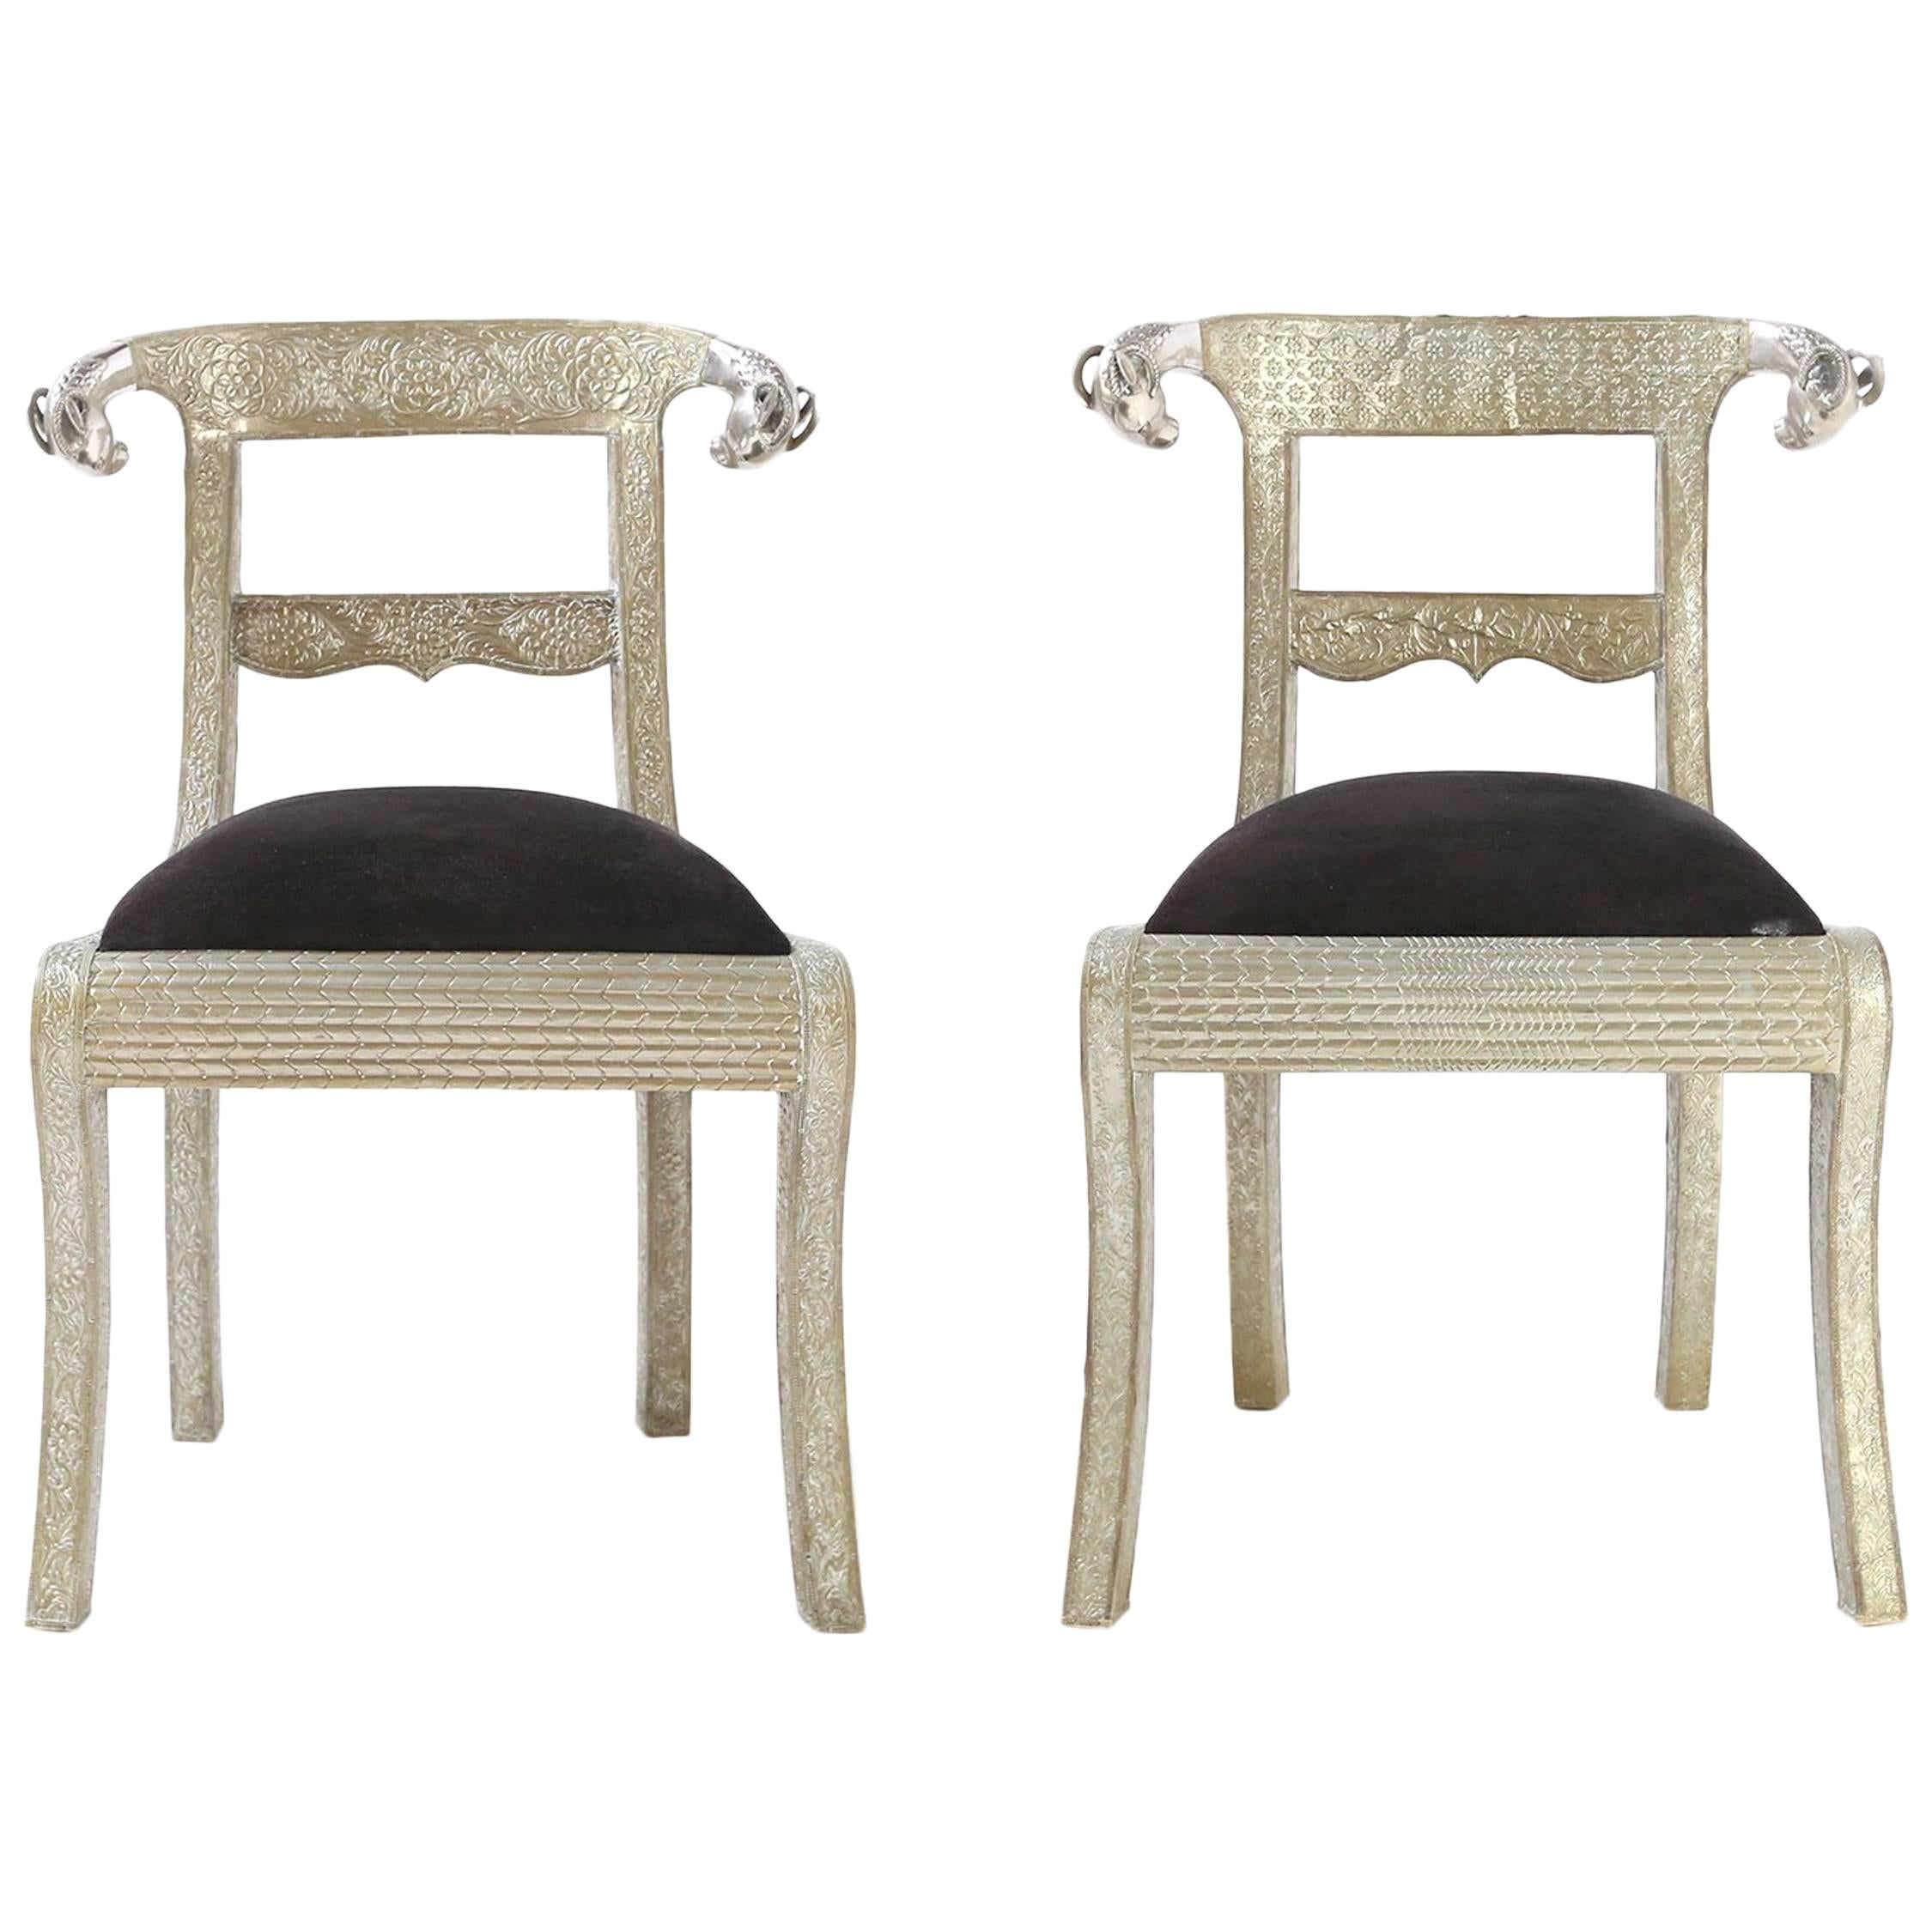 Pair of Ram's Head Metal Wrapped Anglo-Indian Regency Style Dowry Wedding Chairs For Sale